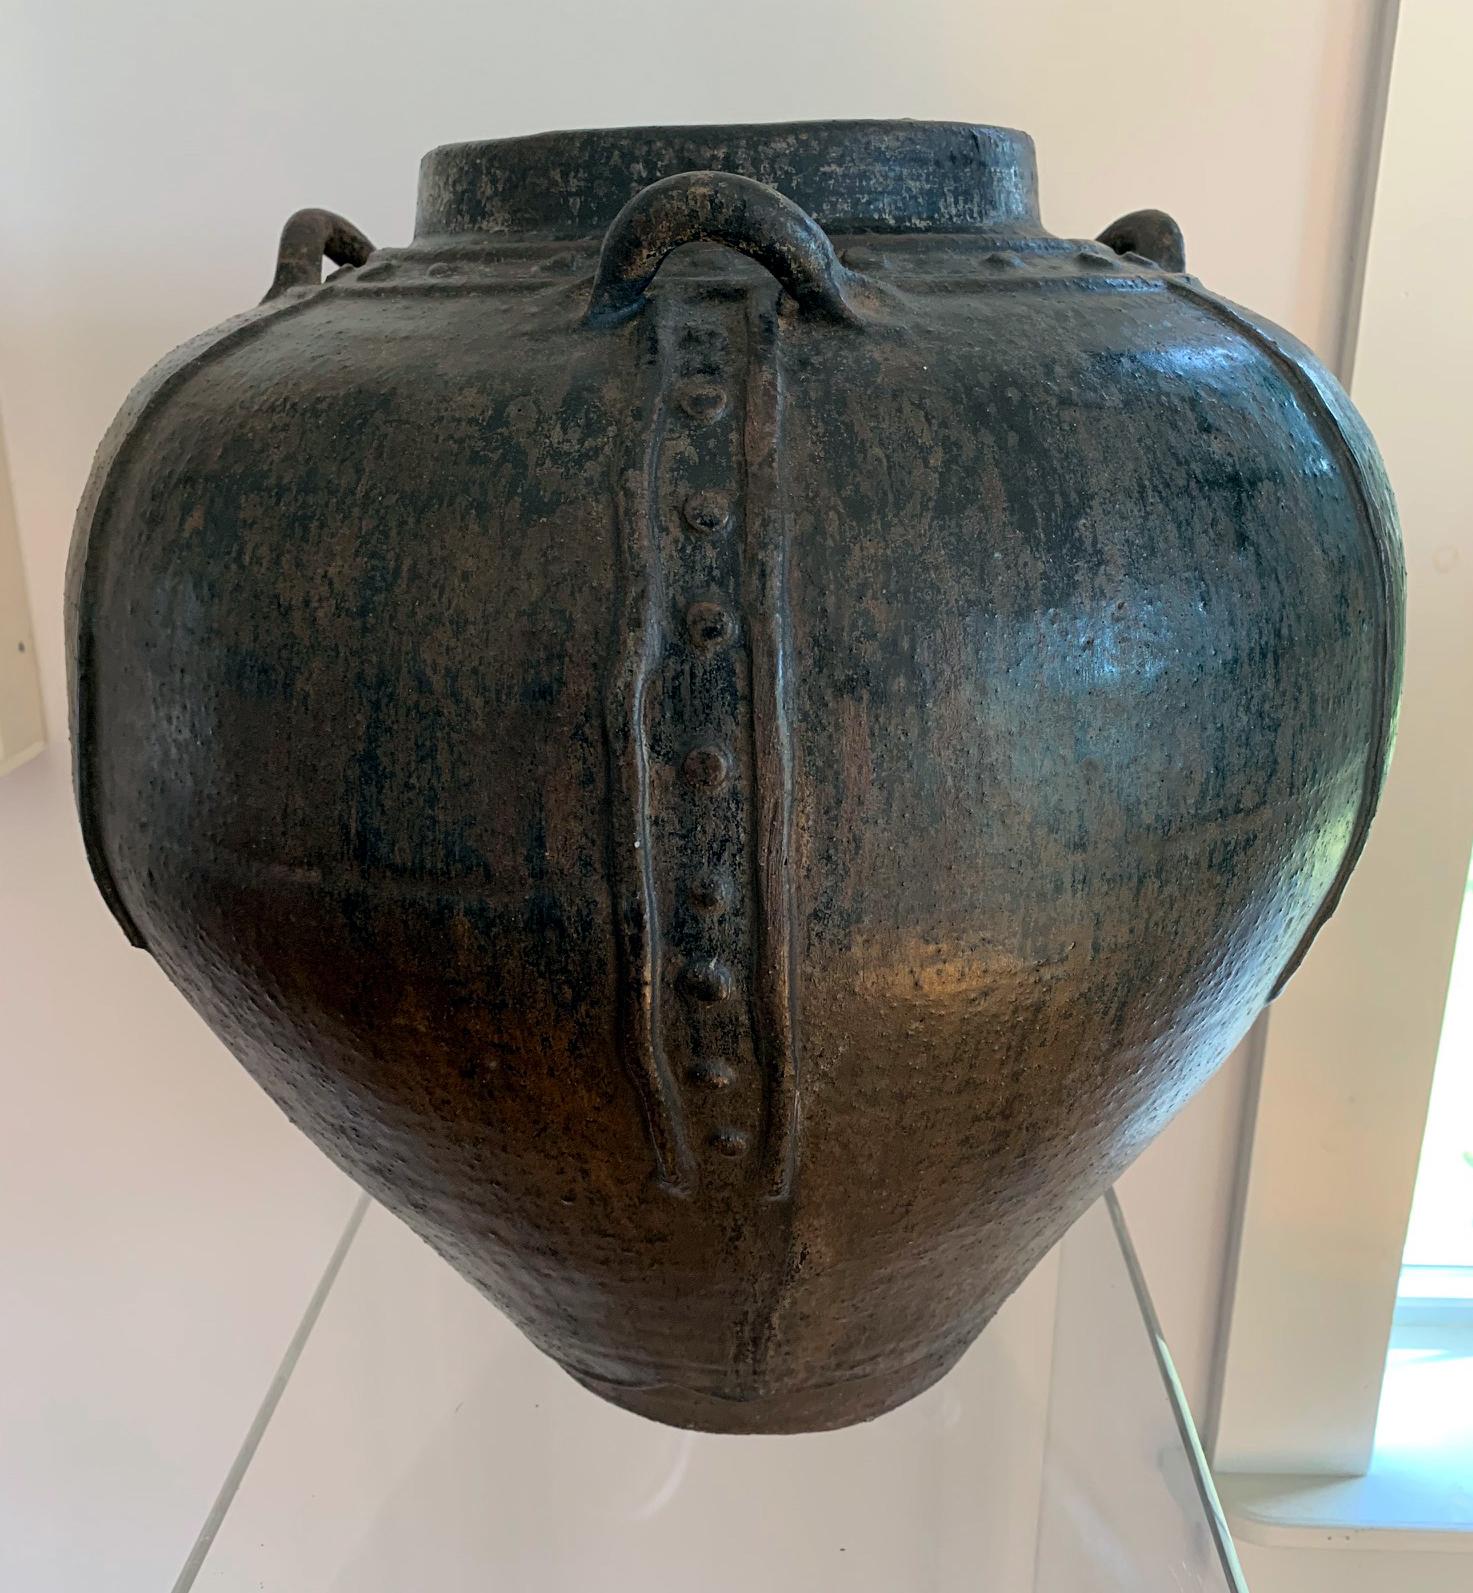 A large ceramic storage jar with dark brown black glaze from Martaban Area of Burma (nowadays Myanmar) circa 15th-16th century. Martaban jar is a generic term for large heavy stoneware jars that were shipped out of the port of Martaban. It doesn't